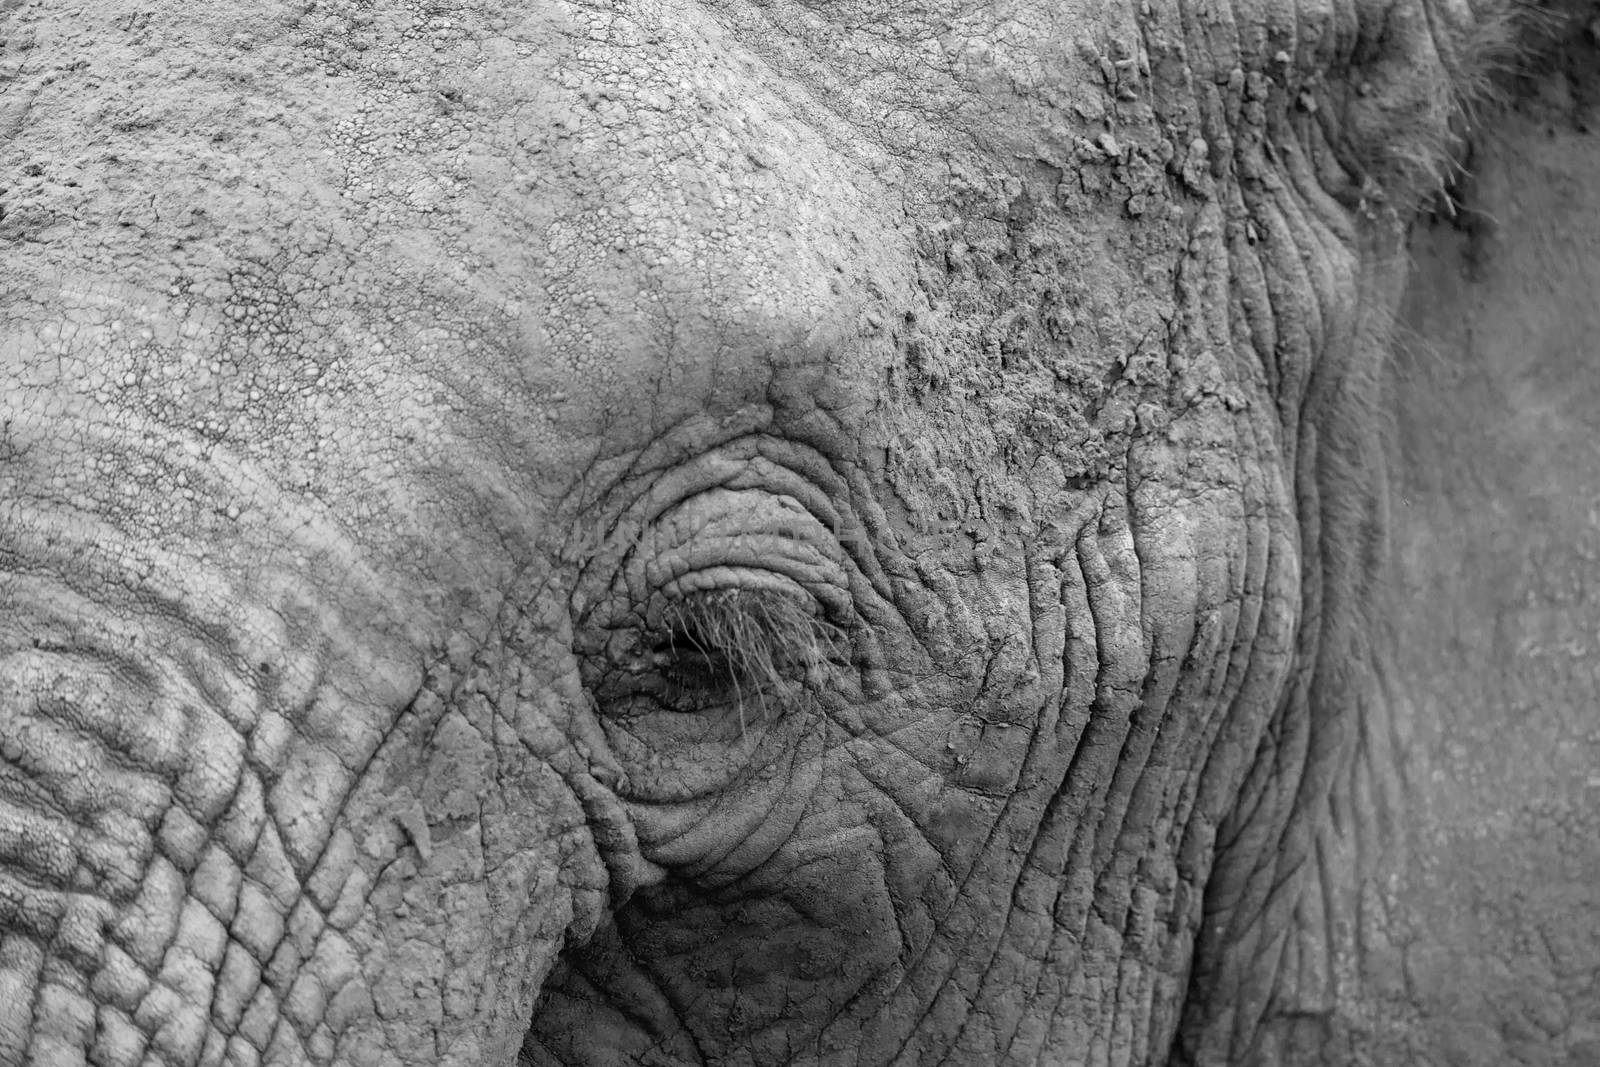 A close-up of the face of a big elephant